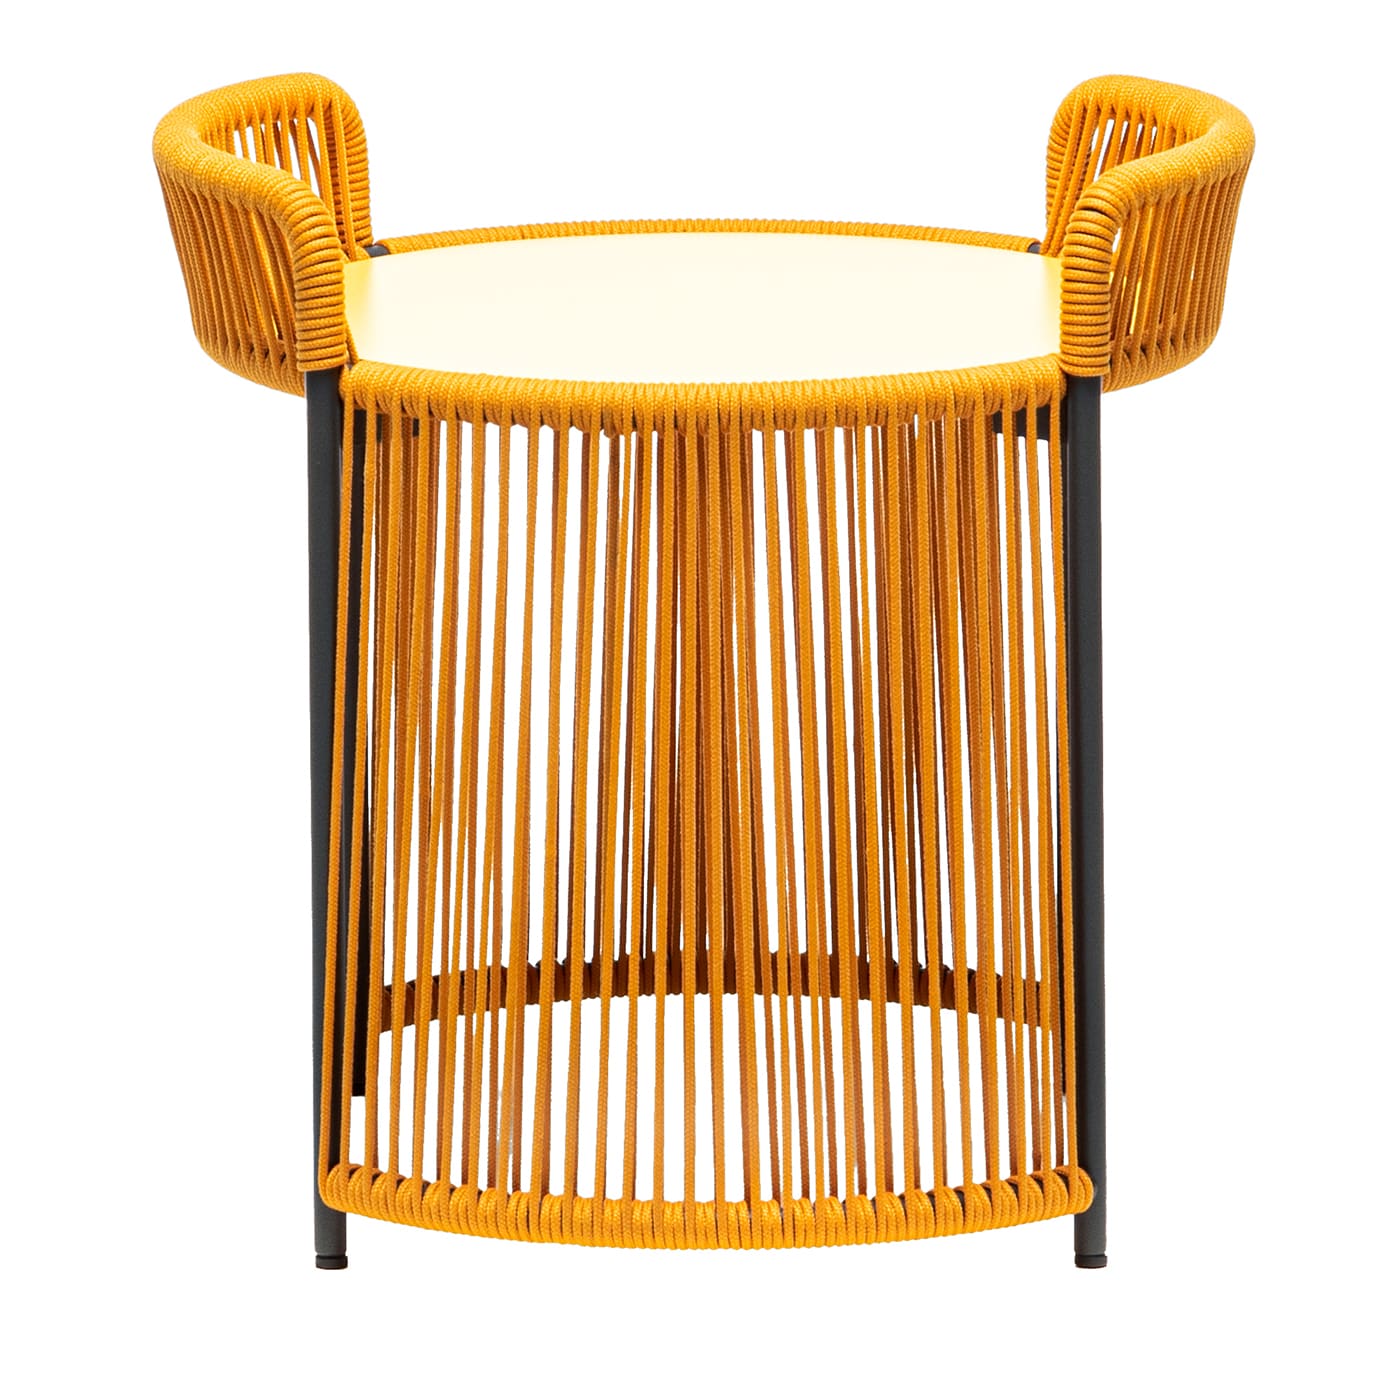 Altana Small Round Yellow Coffee Table by Antonio De Marco - Chairs & More